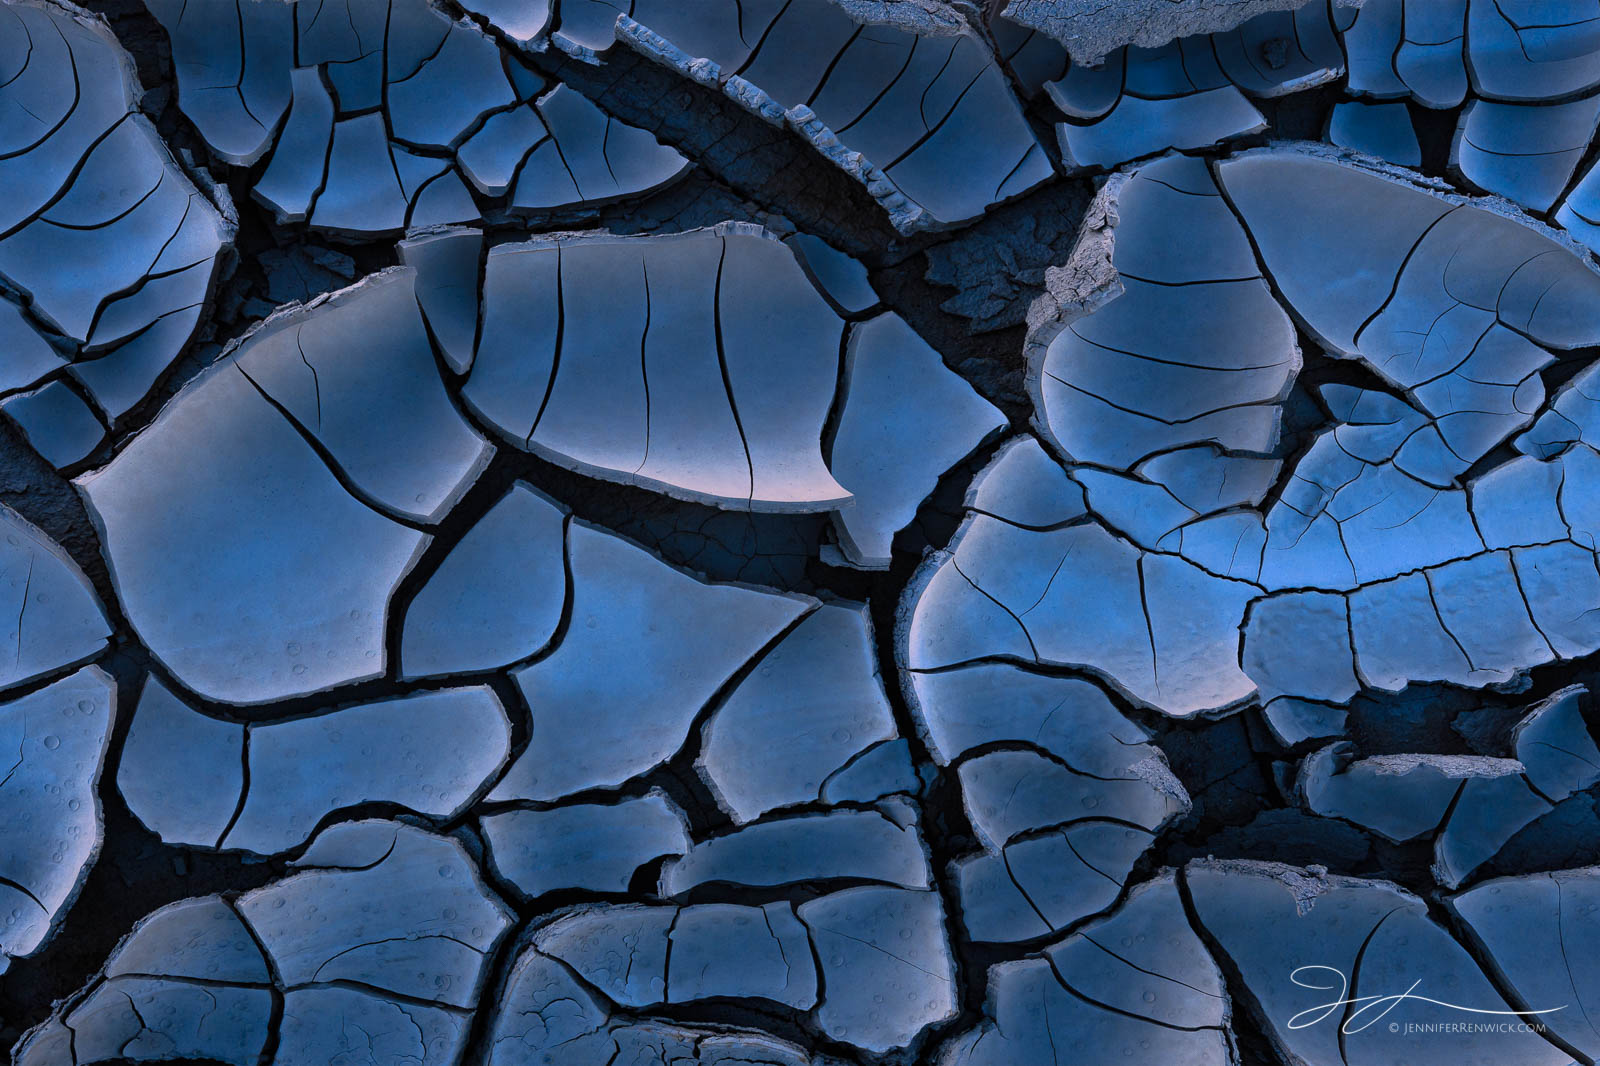 Morning light during the blue hour reflects off mud crack tiles on a playa, creating a blue glow.